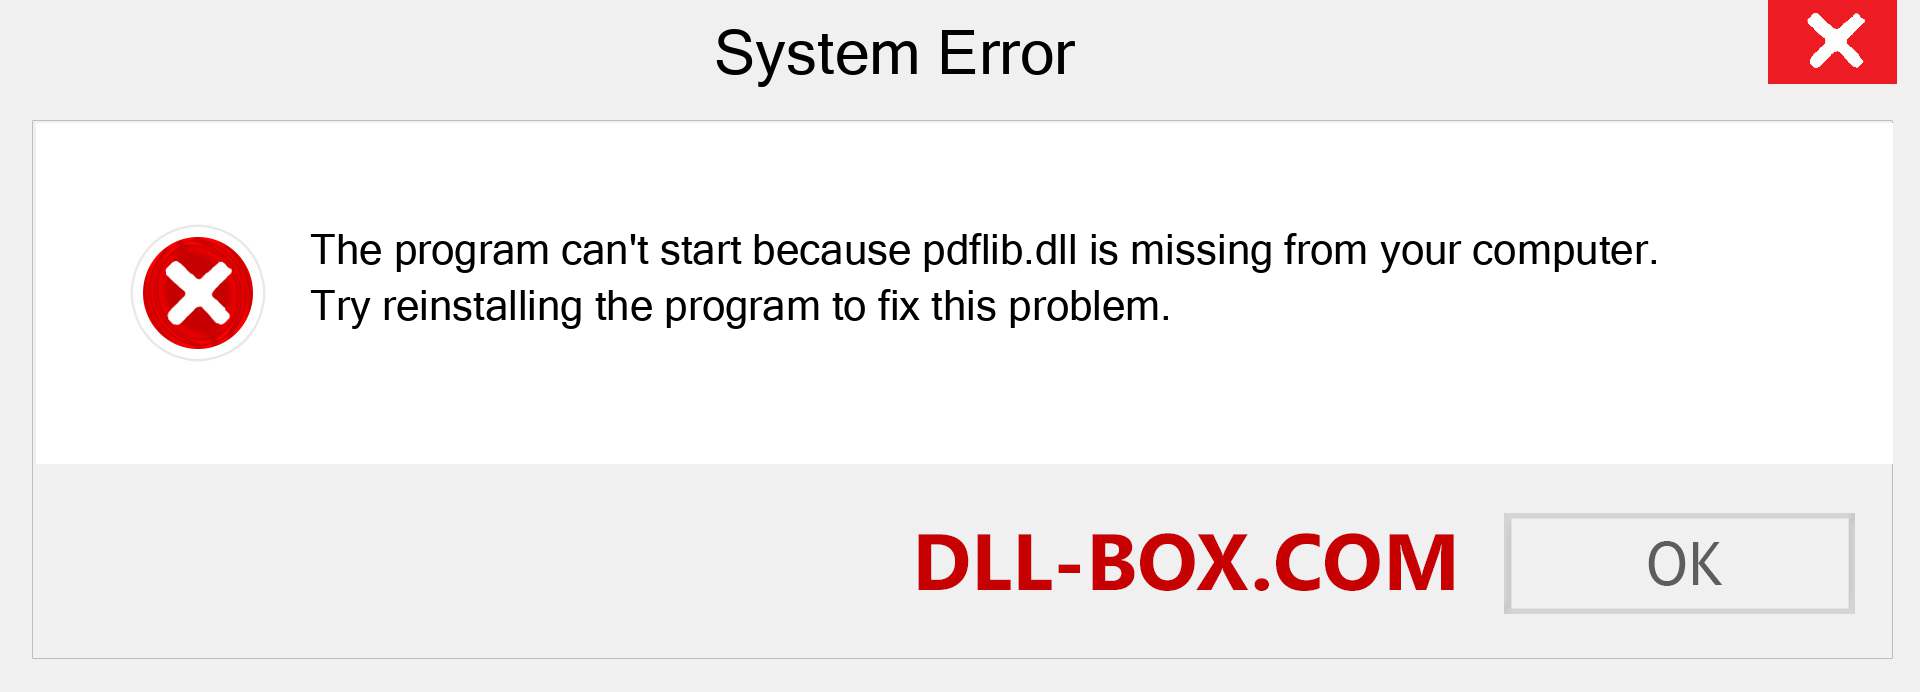  pdflib.dll file is missing?. Download for Windows 7, 8, 10 - Fix  pdflib dll Missing Error on Windows, photos, images